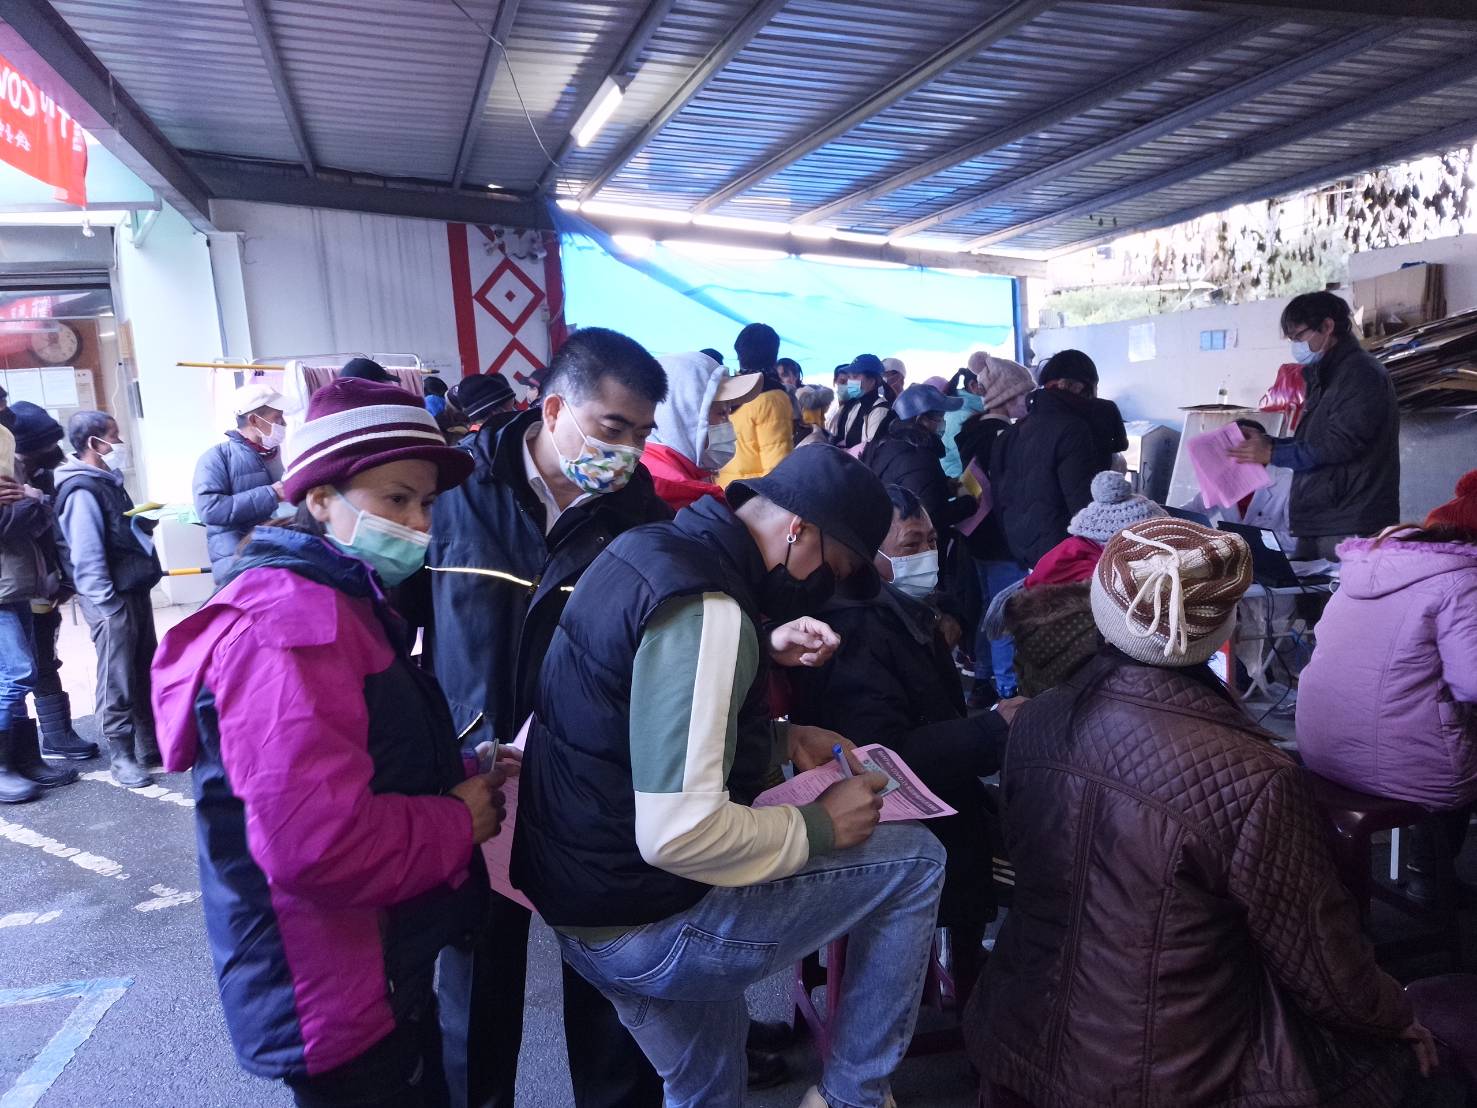 Crowd flocked to the vaccination site. (Photo / Provided by the Taichung City Second Service Center)